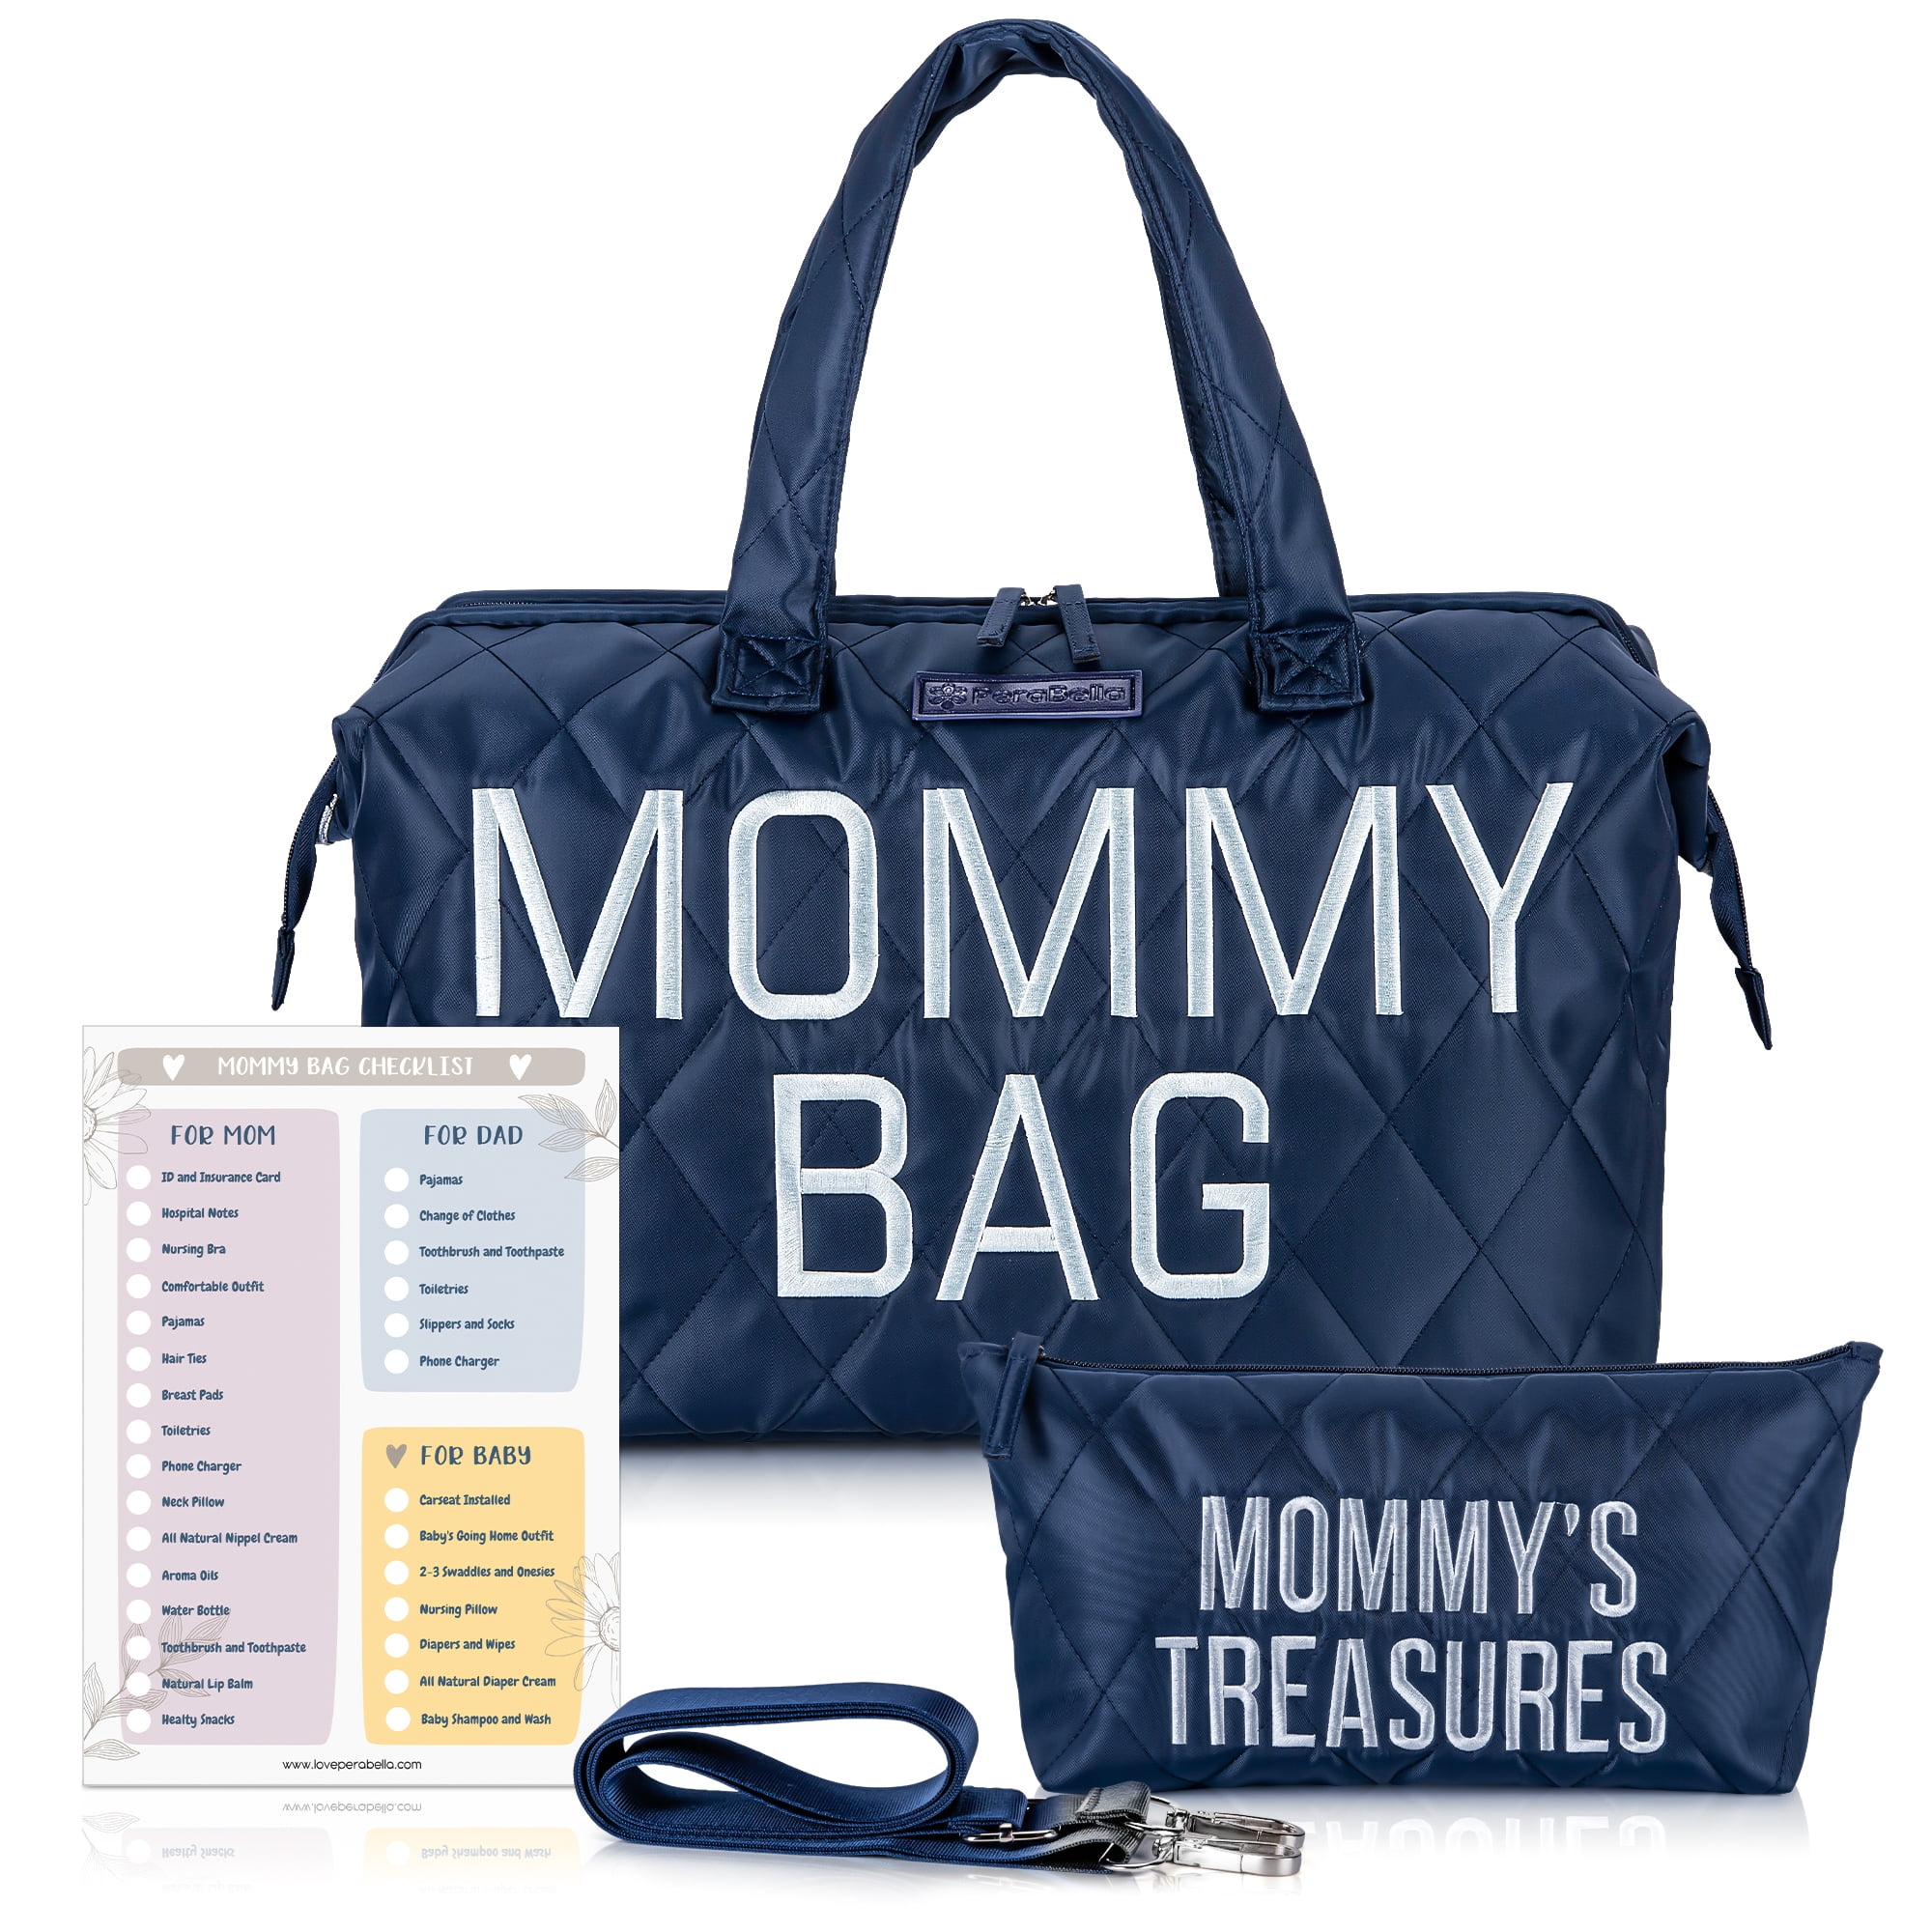 Perabella Mommy Bag for Mother s Hospital Mommy Hospital Bags for Labor and Delivery Mommy Bag Tote Blue 45660243 7d31 4ffe 9adb 0e1636083bff.5092bd50fcceceb1a924c0d9e2abe44b